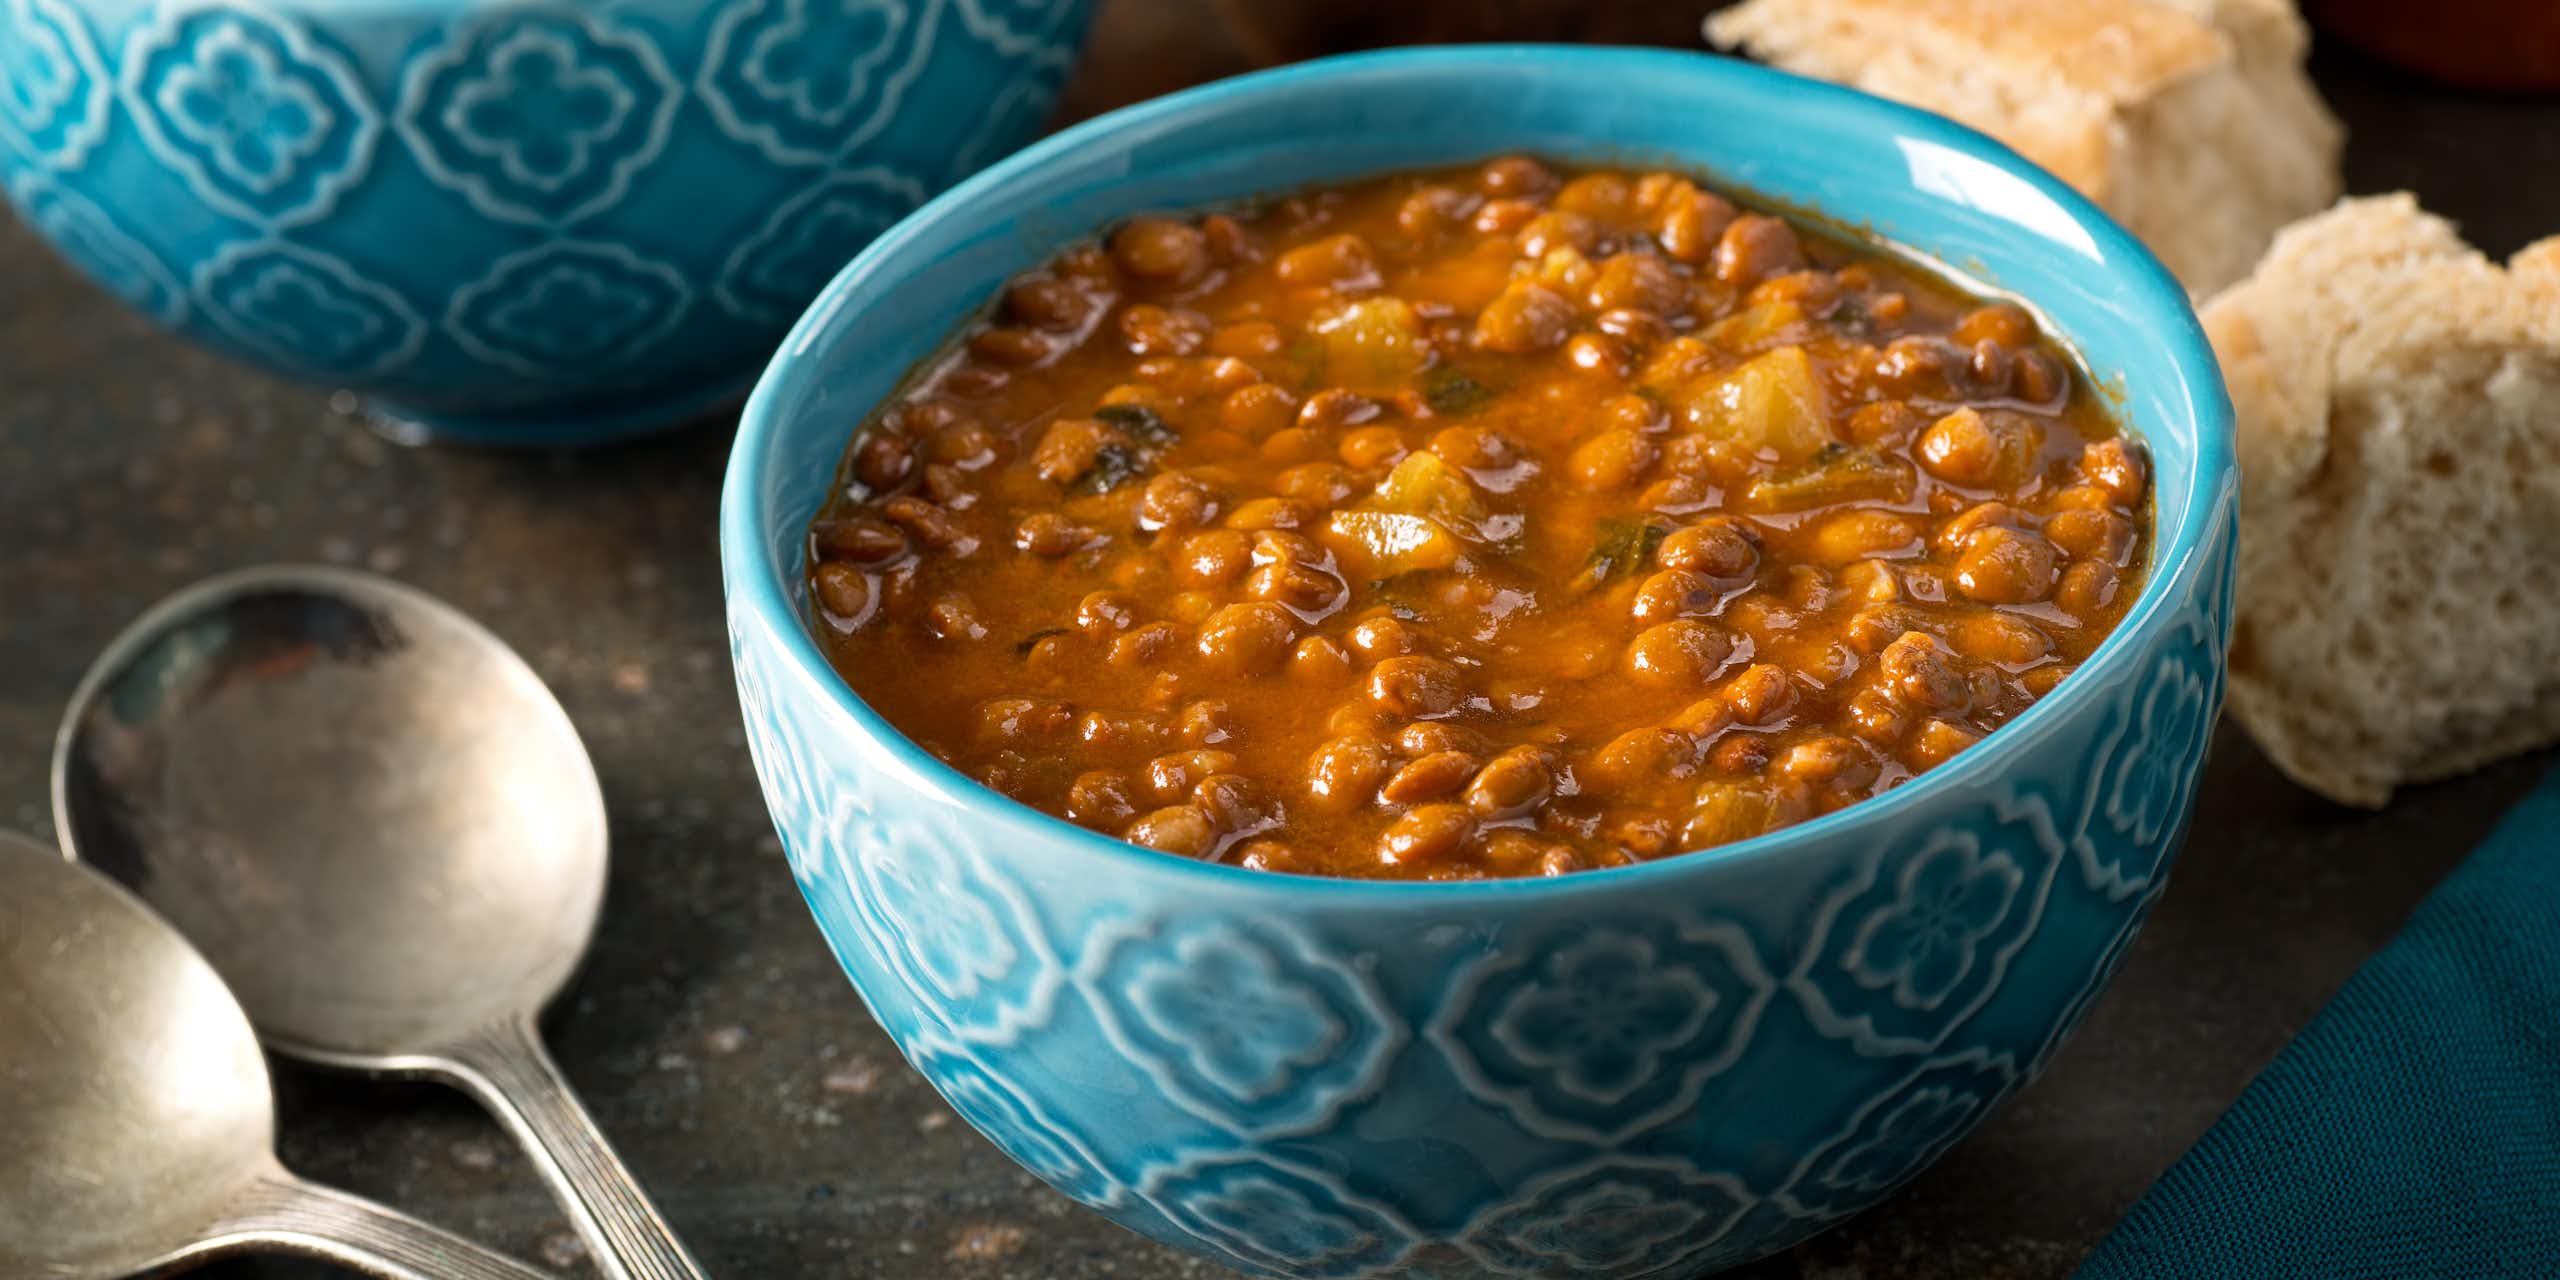 A bowlful of cooked lentils.